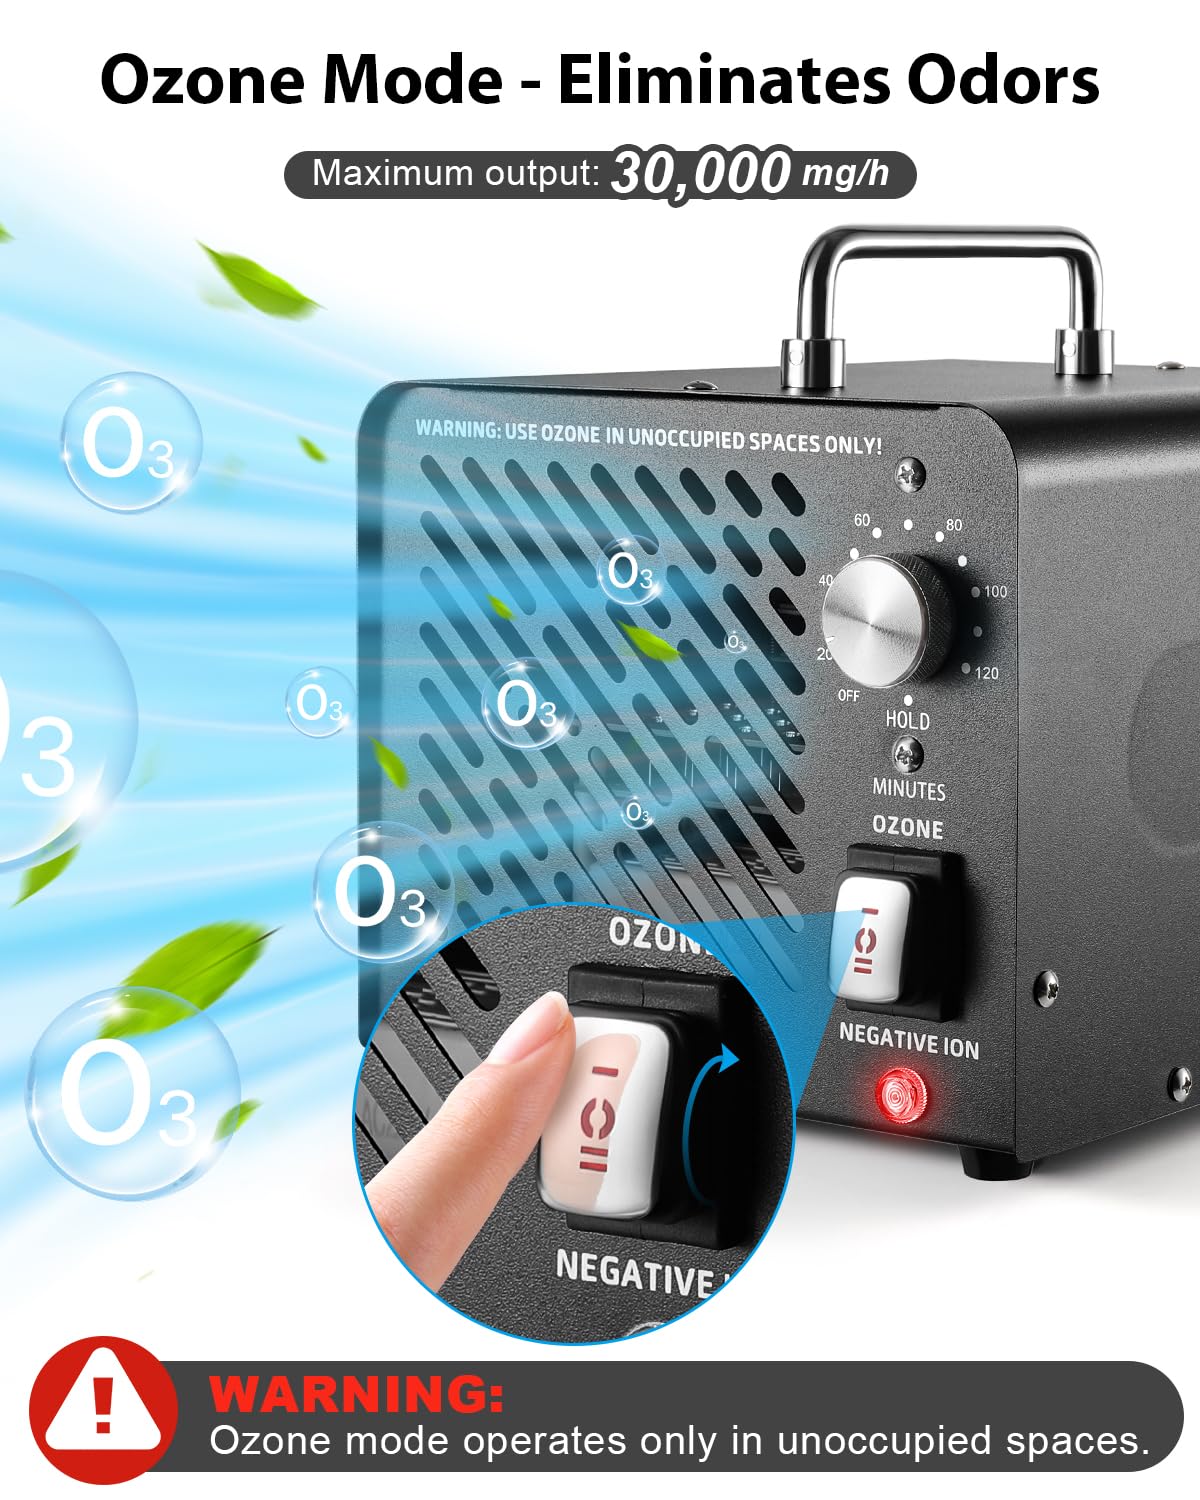 Tiiroy 0zone Negat𝗂ve Iᴑns Generator for Home - 30,000mg/h (Black)